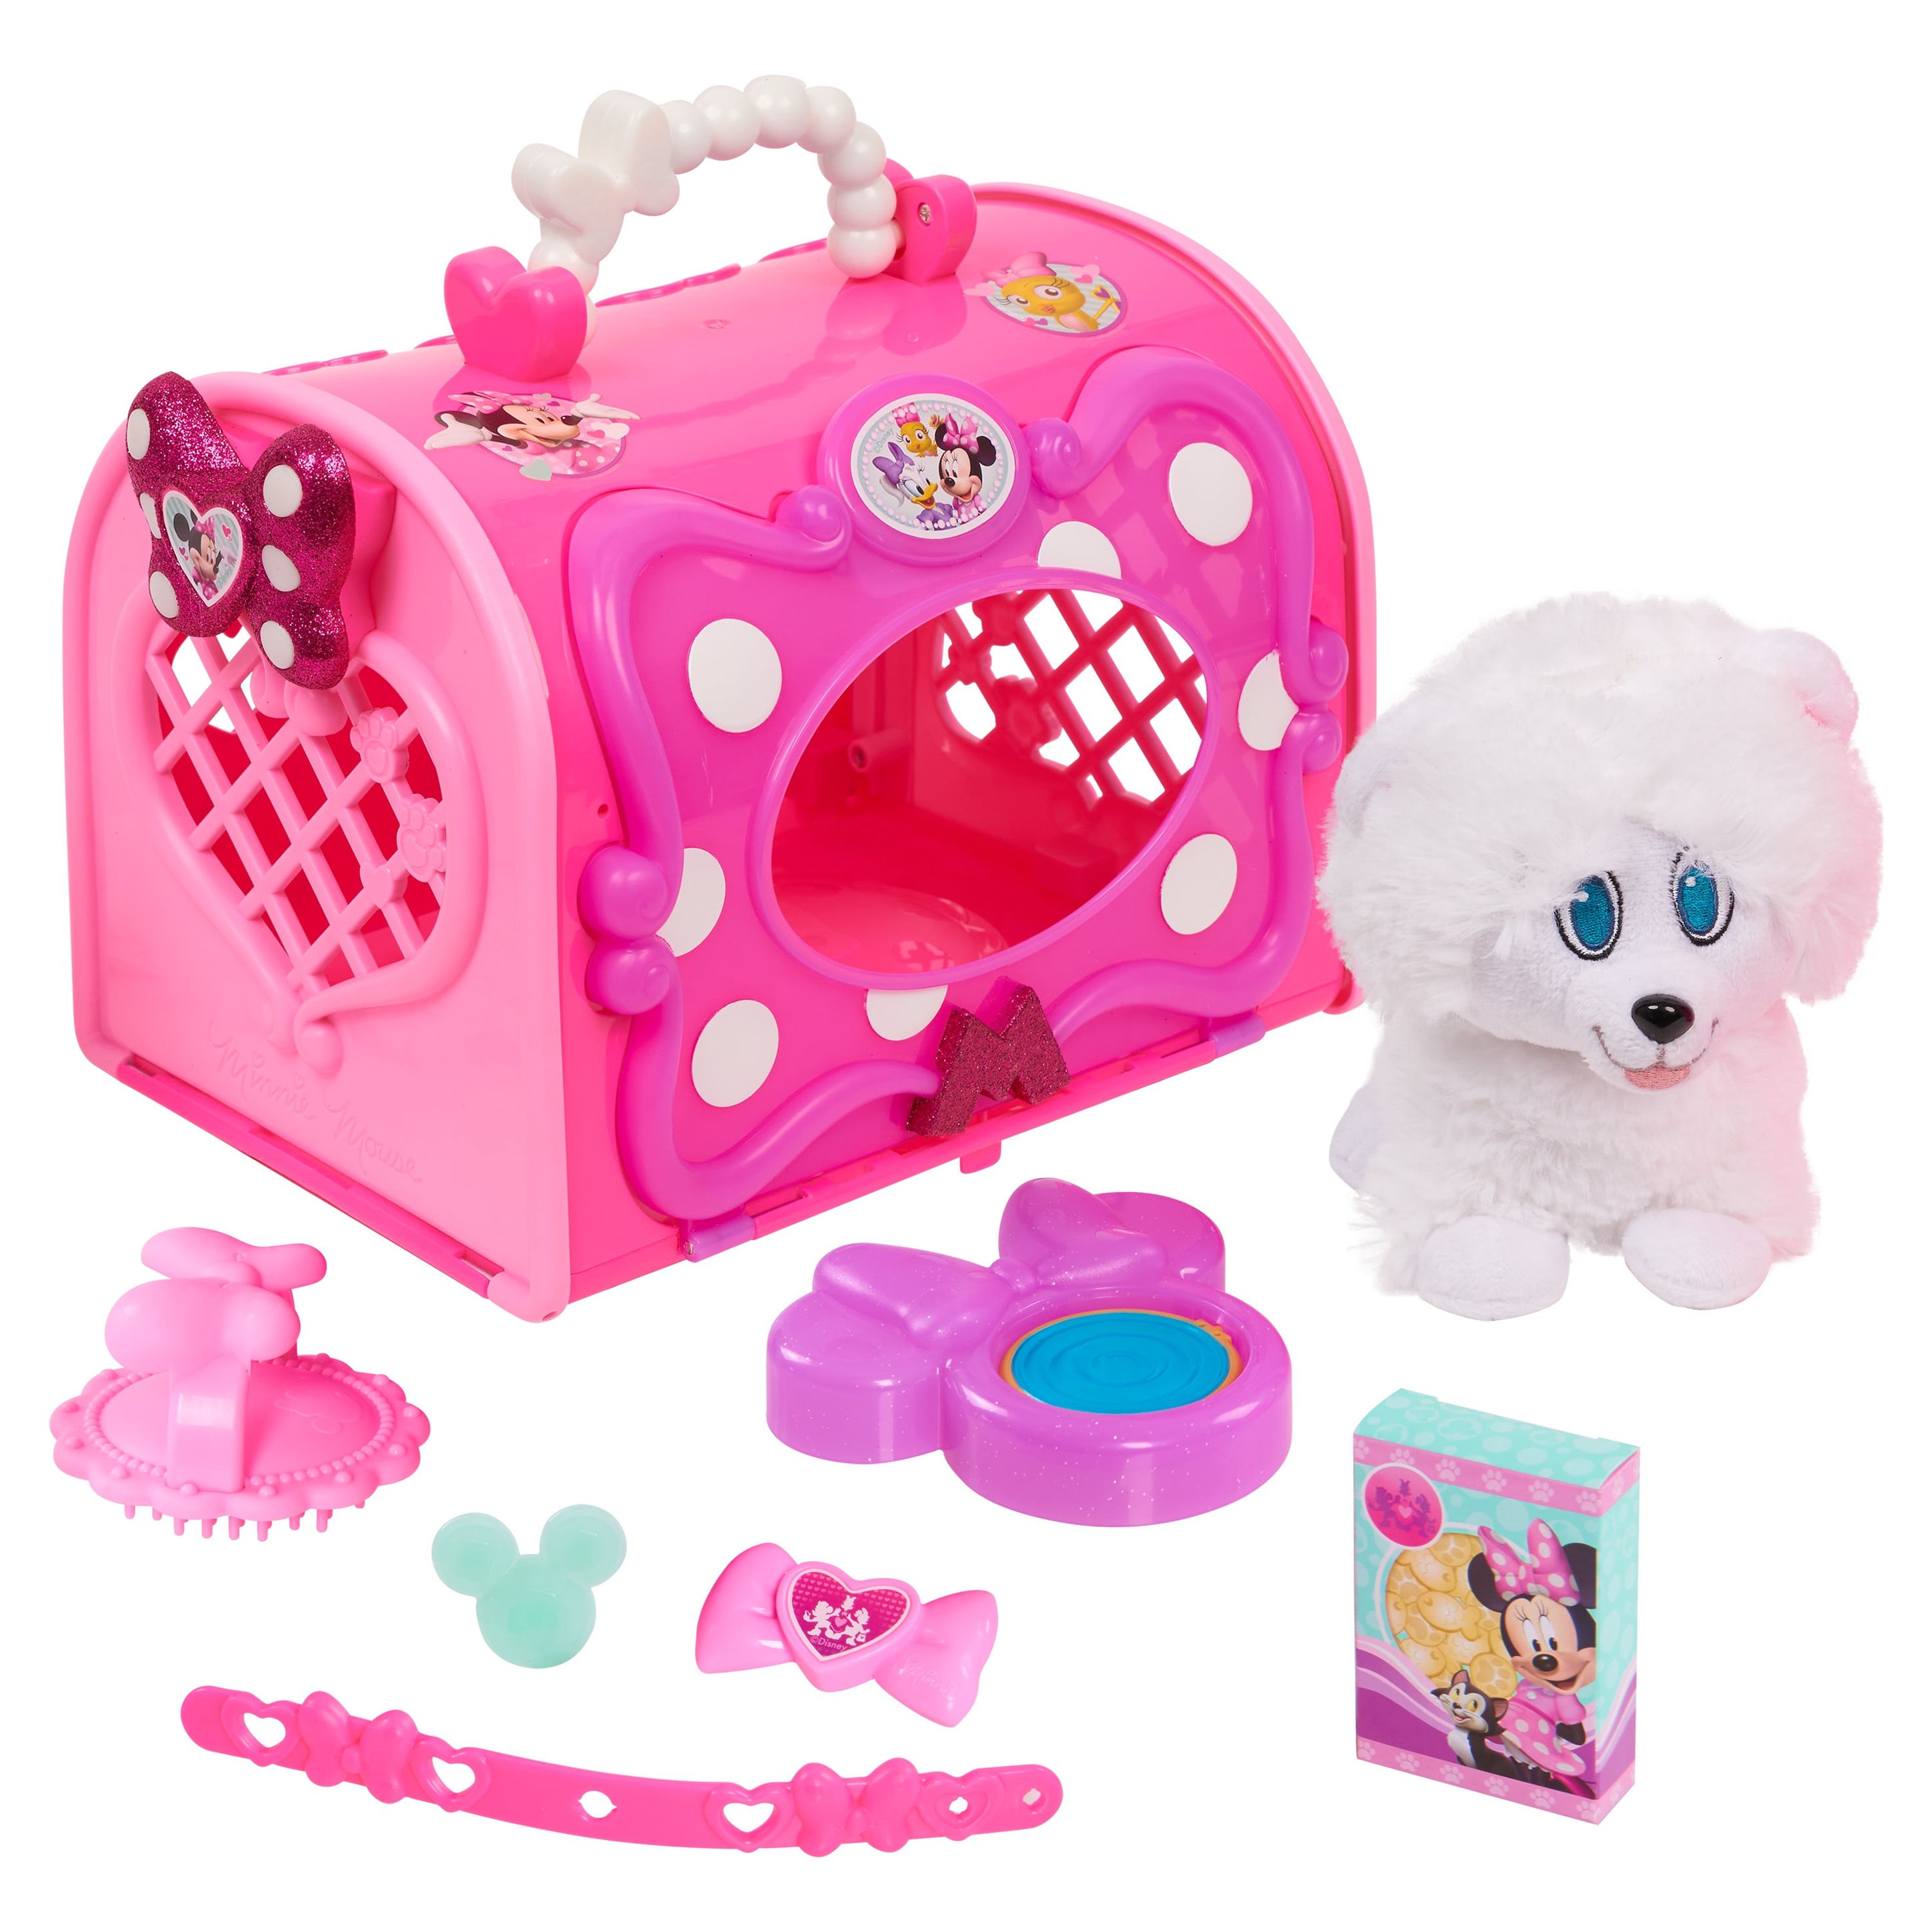 Minnie's Happy Helpers Pet Carrier, Officially Licensed Kids Toys for Ages 3 Up, Gifts and Presents - image 2 of 2